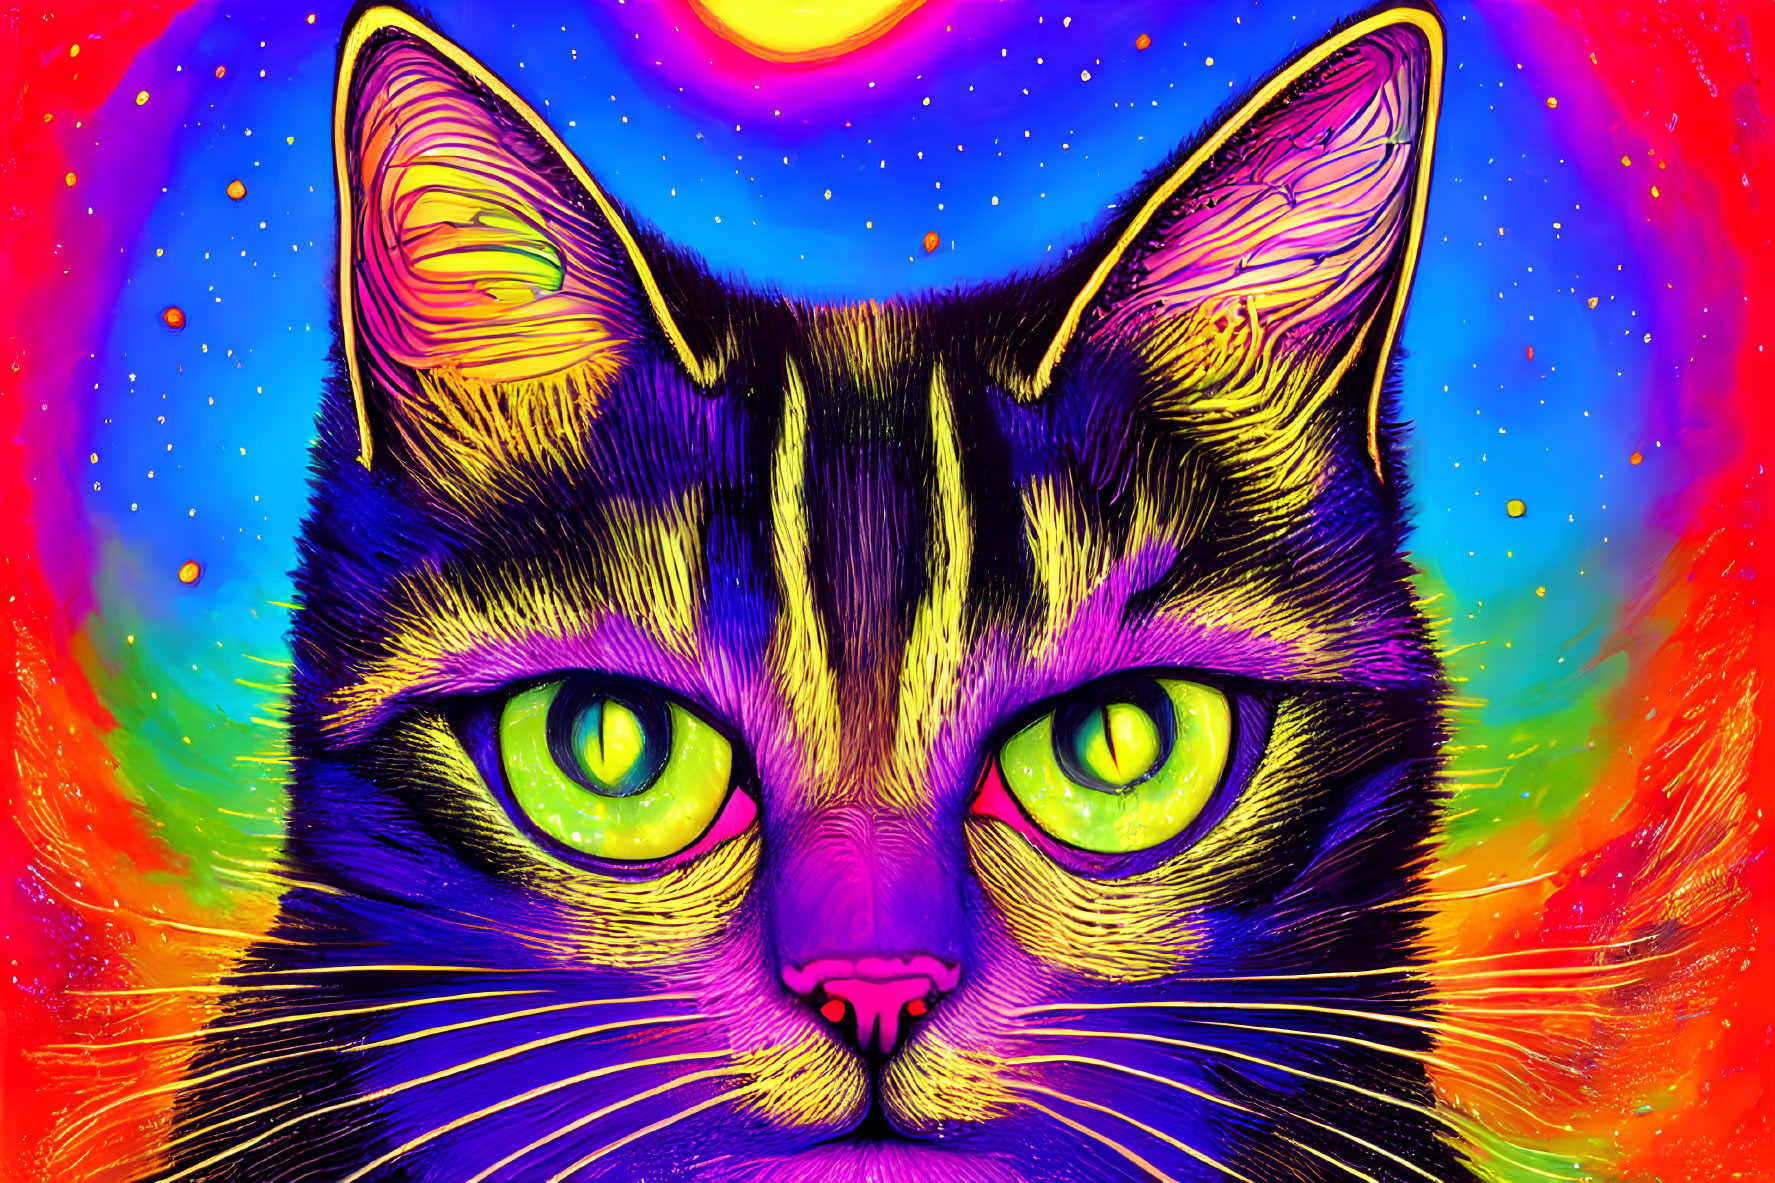 Colorful Psychedelic Cat Illustration with Electric Green Eyes on Space-themed Background